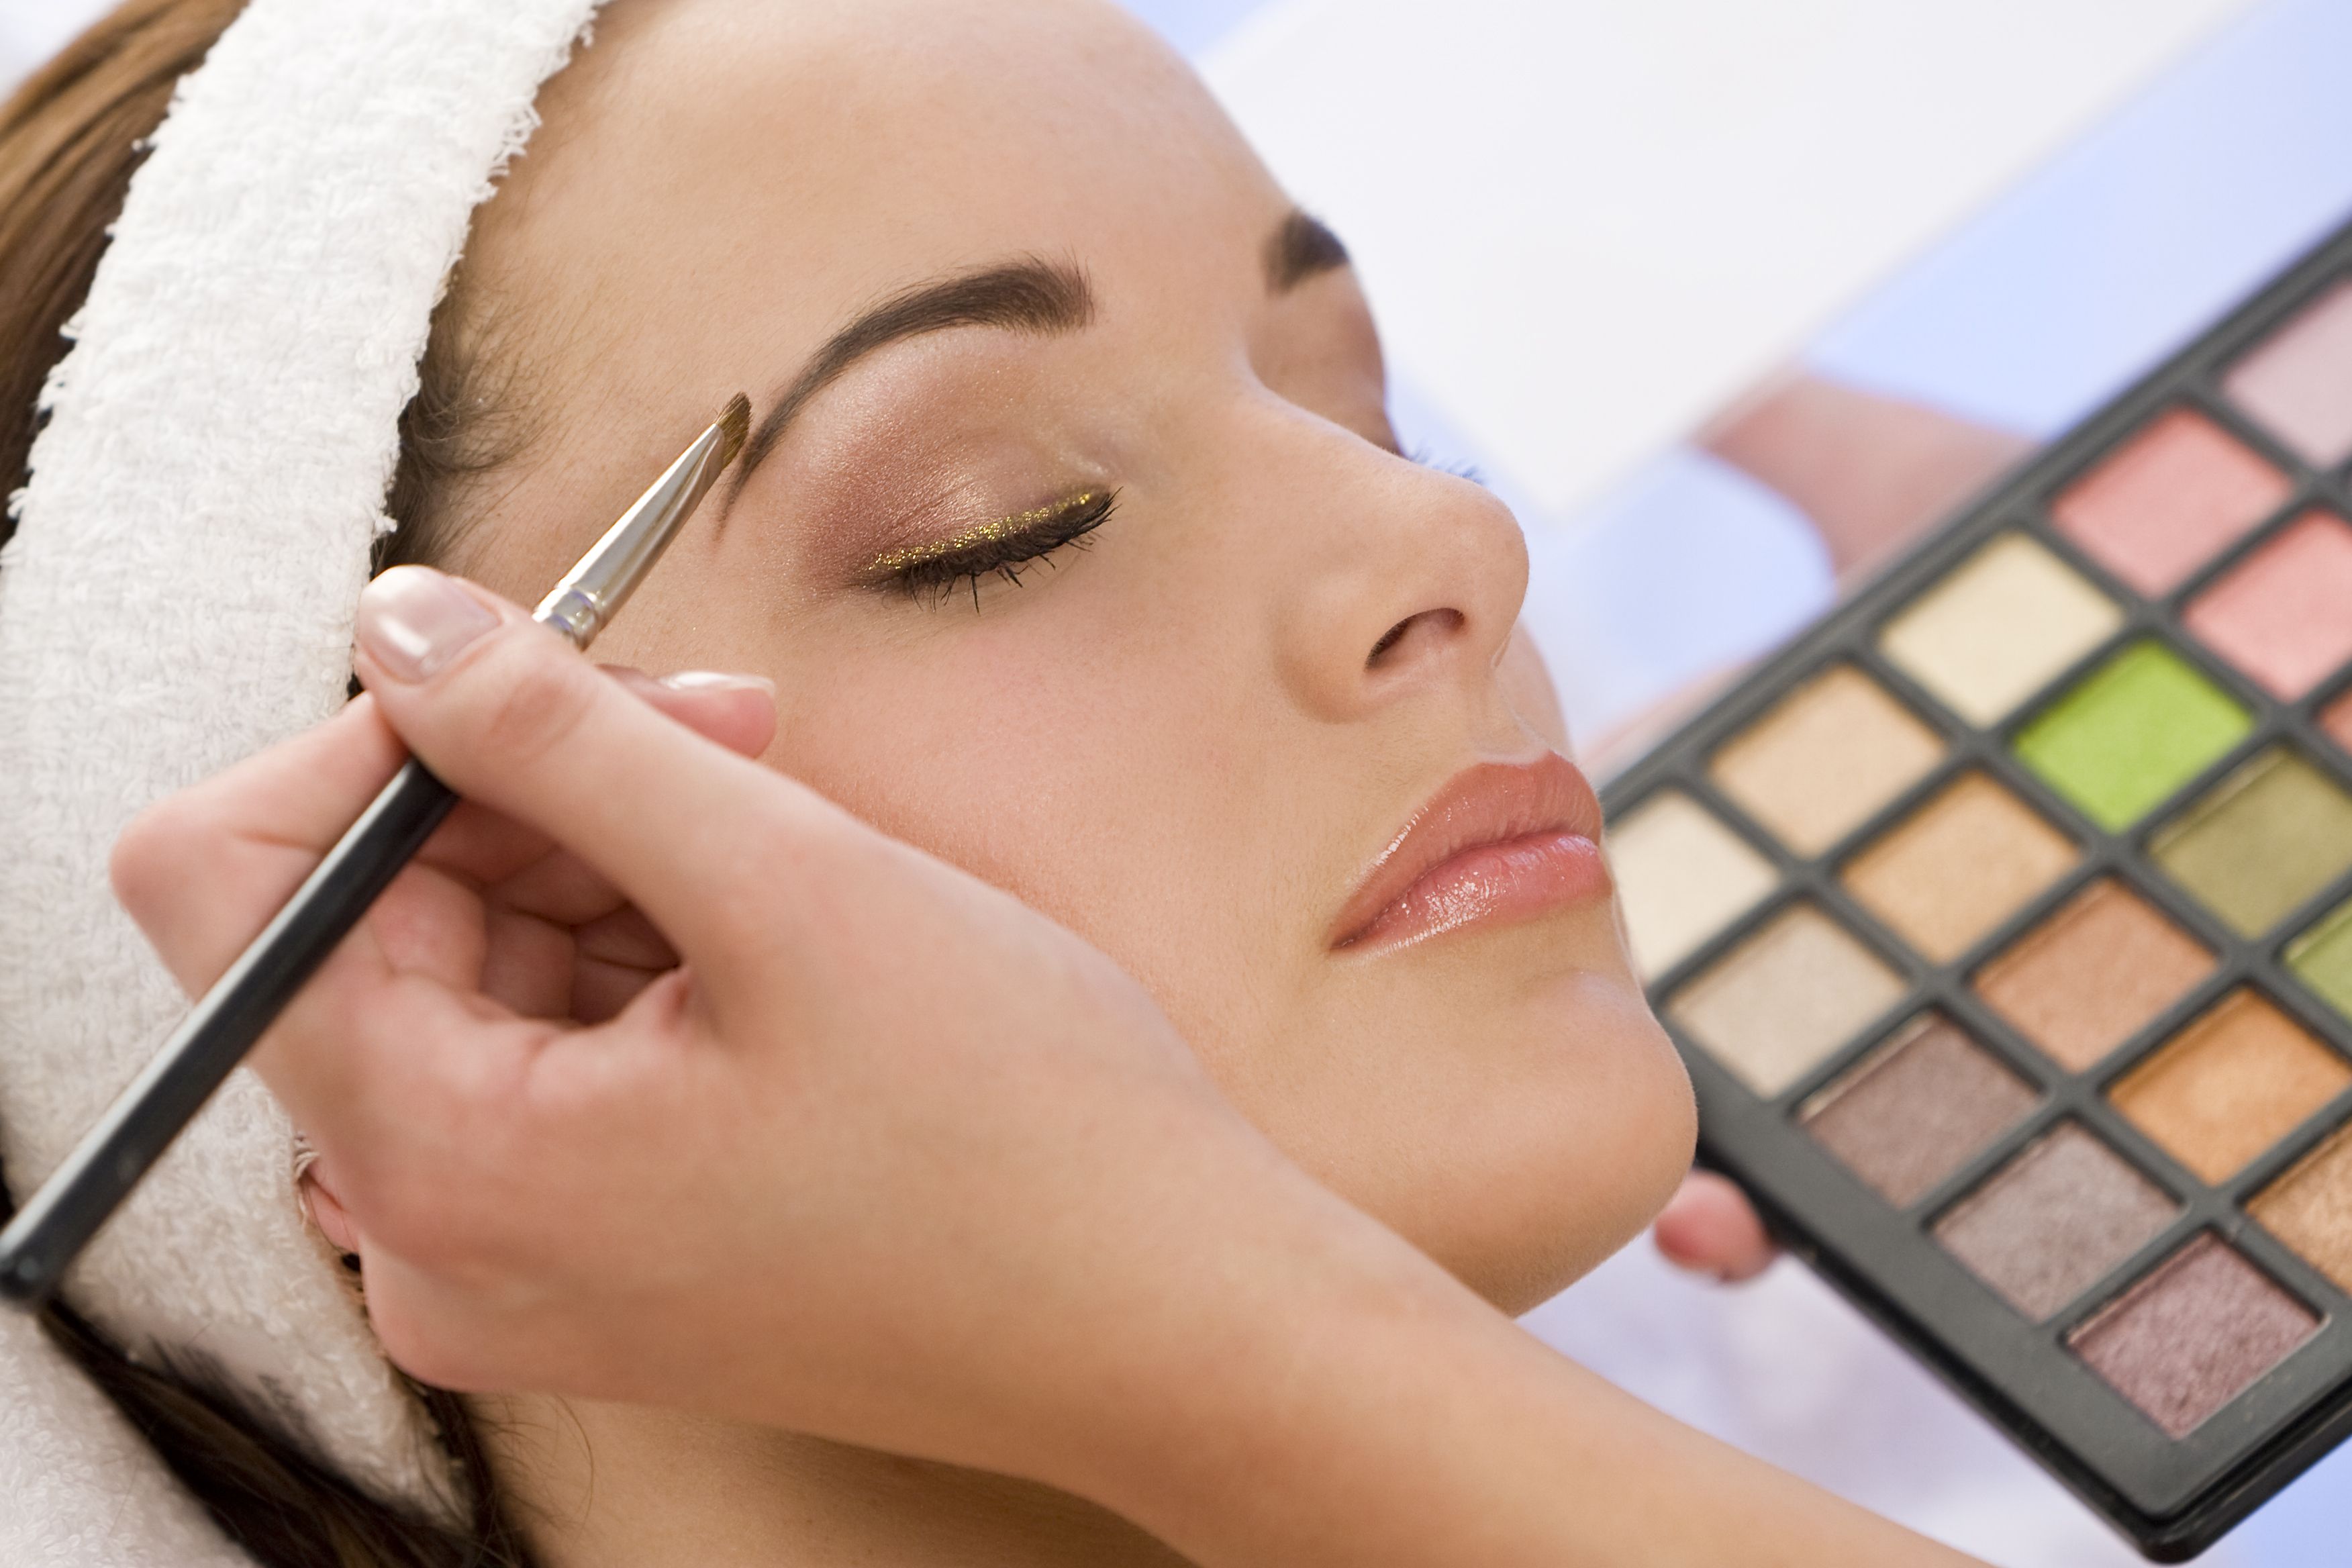 Excellent Schools For Cosmetology In Overland Park KS